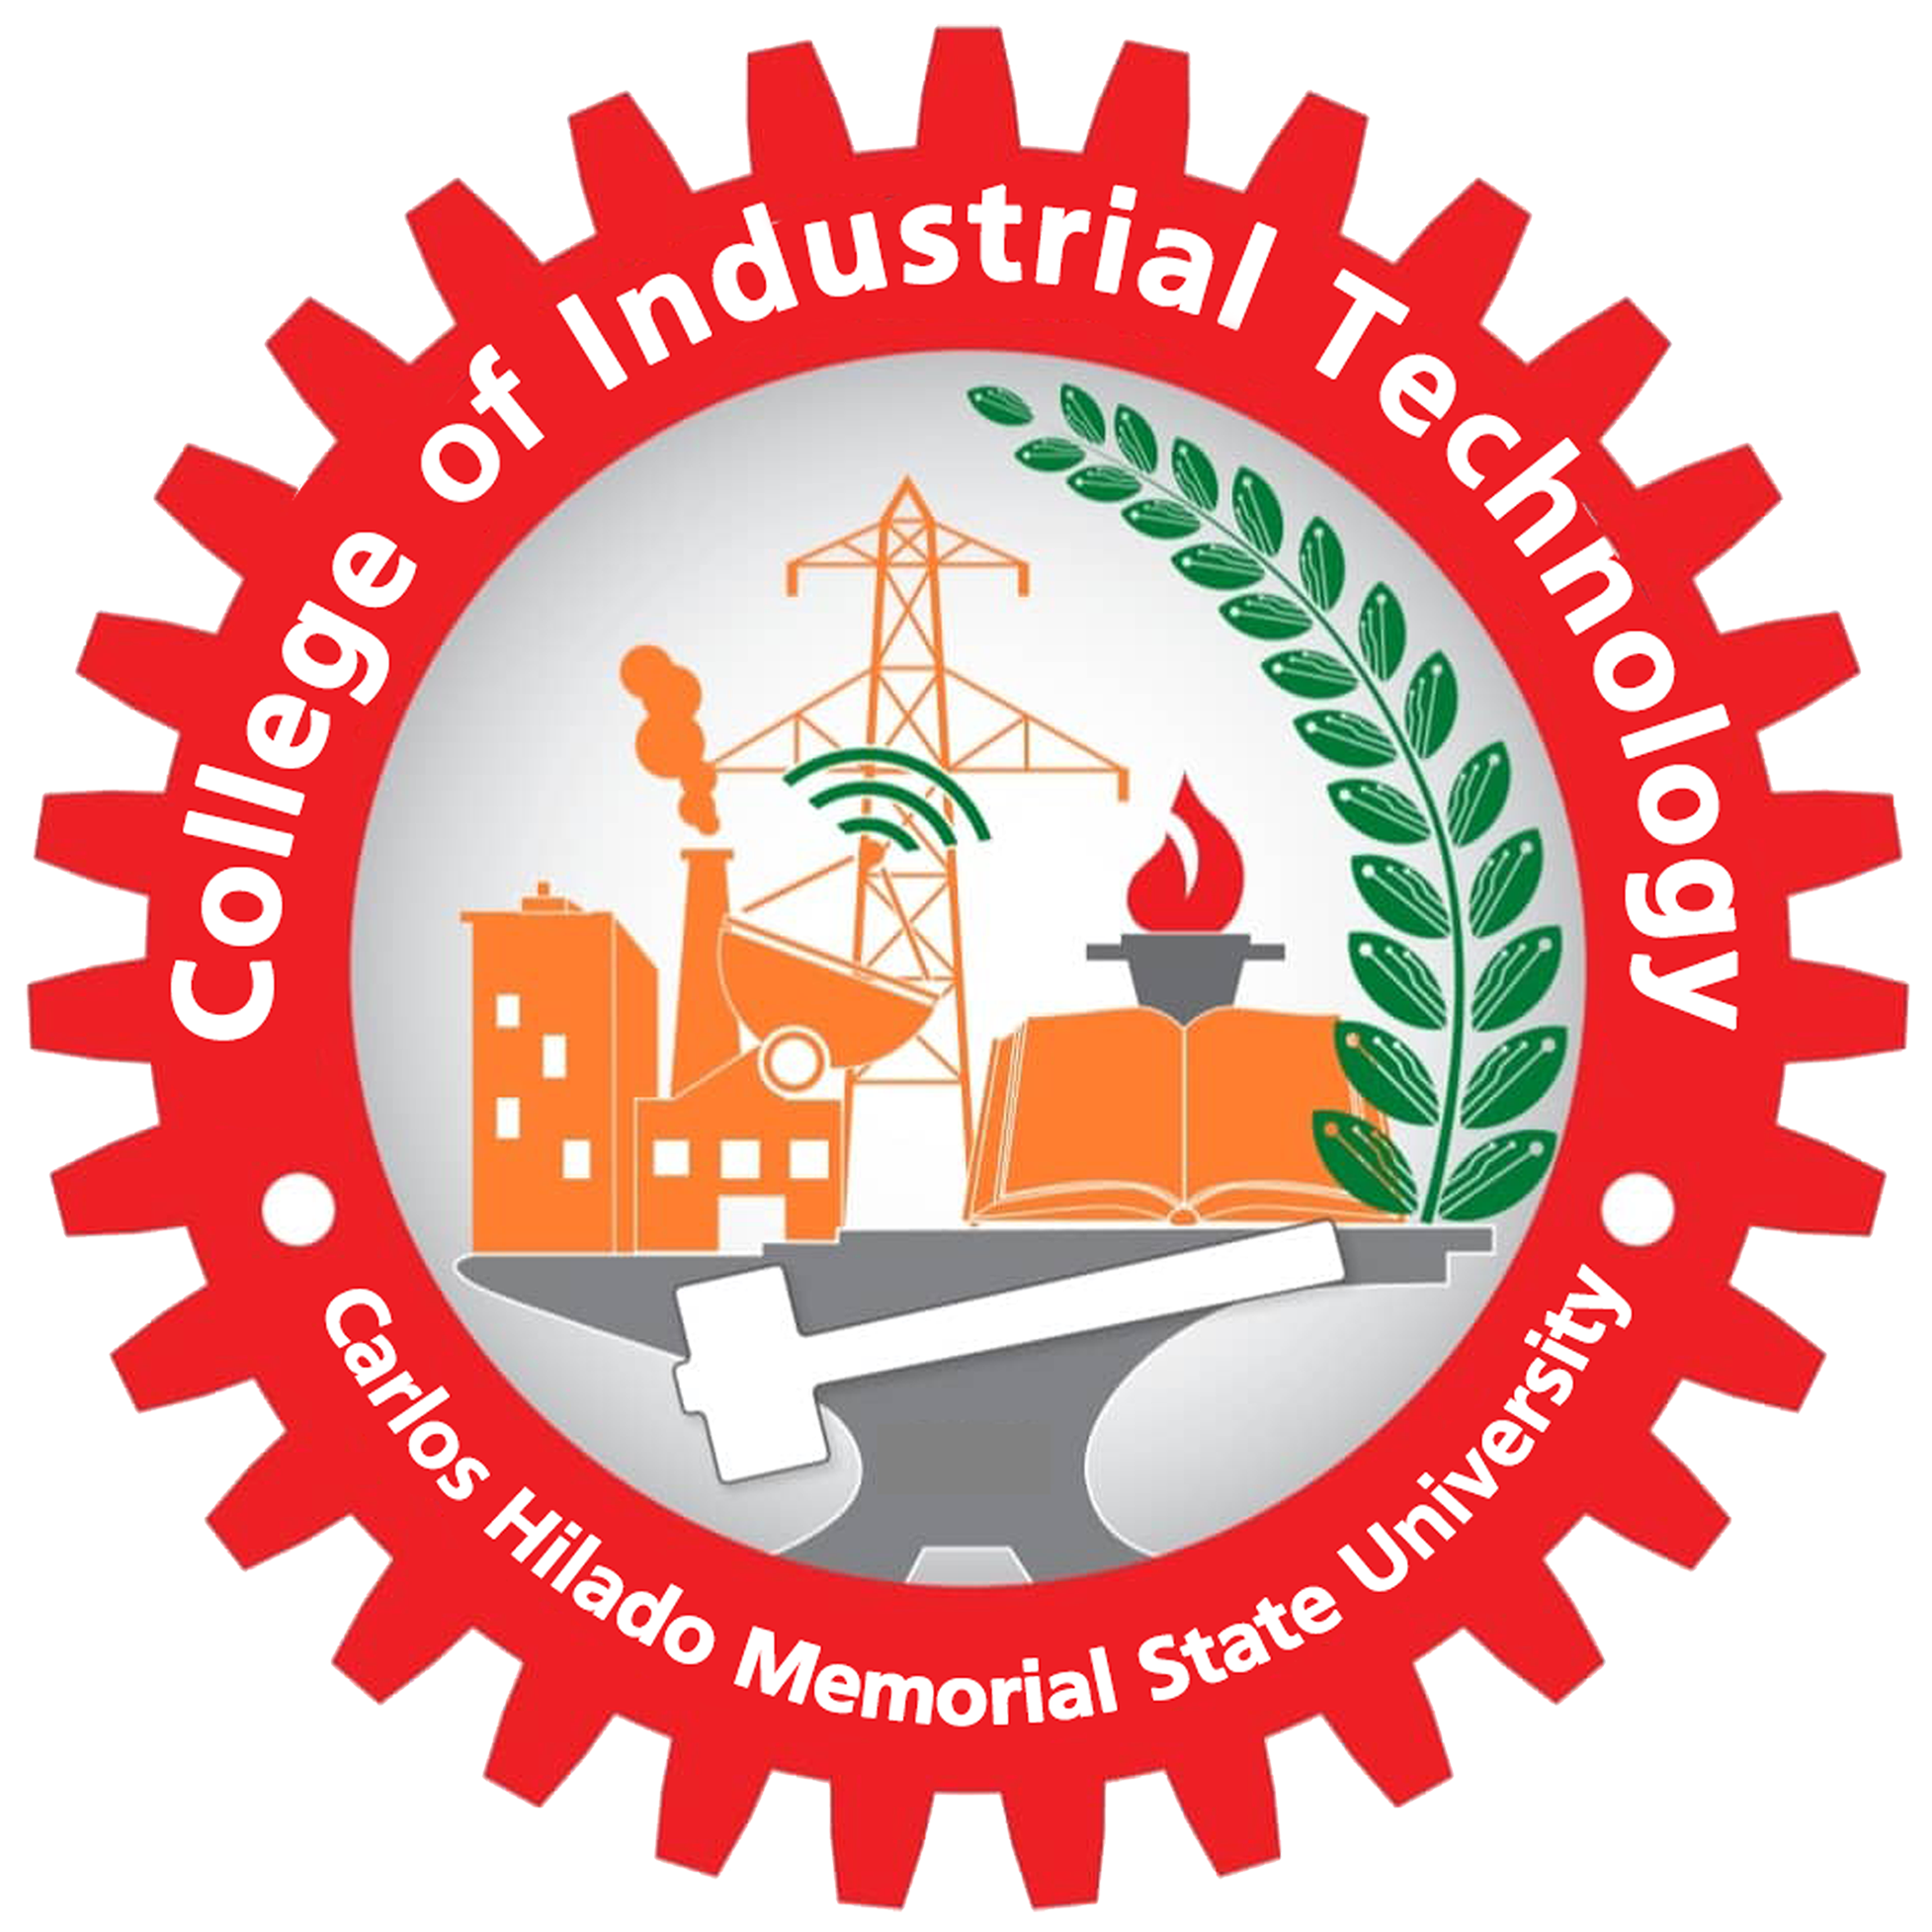 College of Industrial Technology